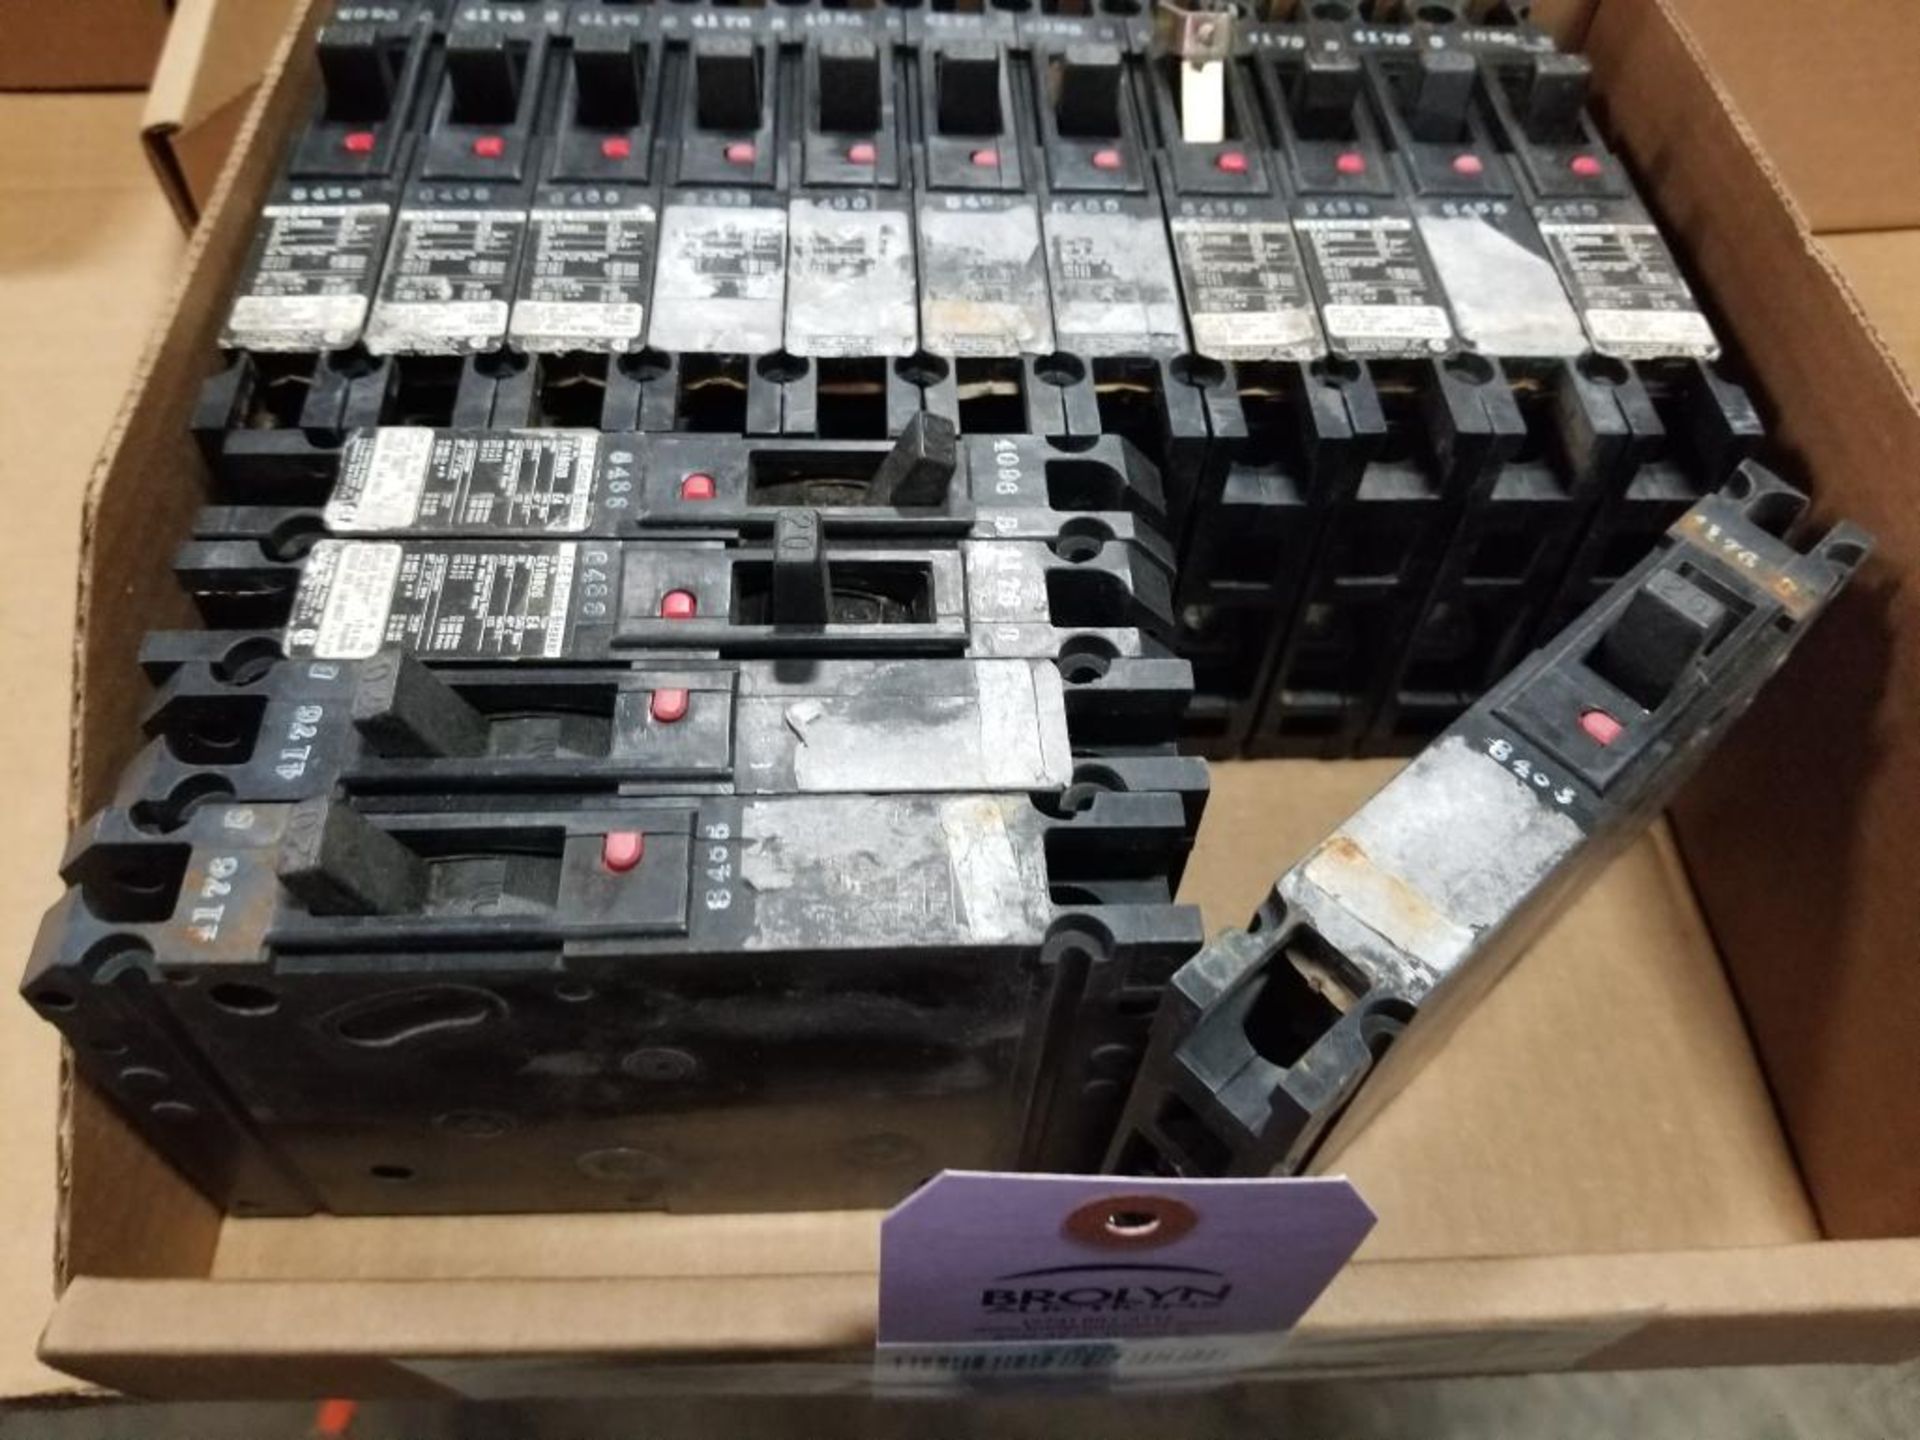 Qty 16 - Assorted ITE circuit breakers. - Image 6 of 6